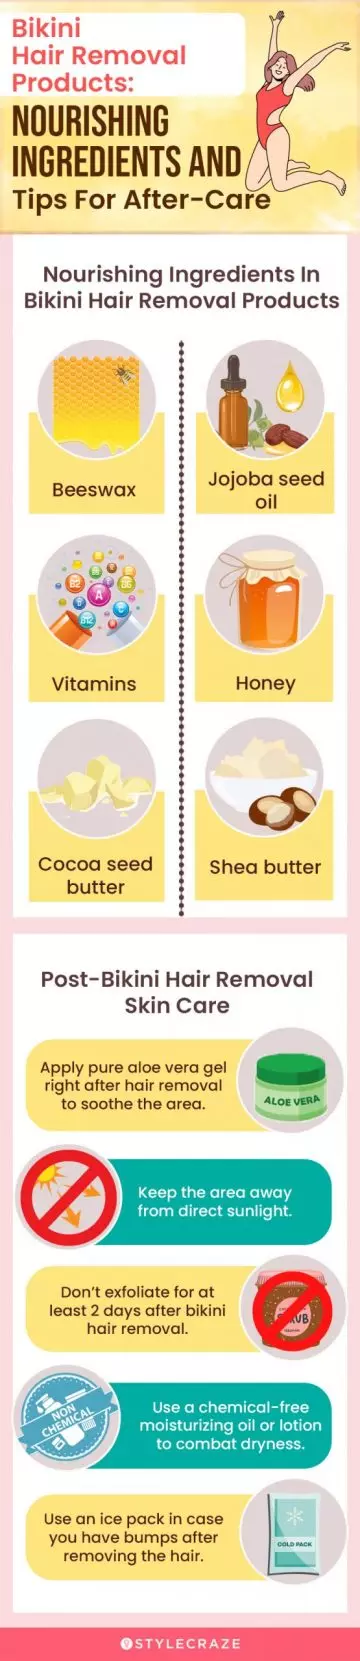 Bikini Hair Removal Products: Nourishing Ingredients And Tips (infographic)